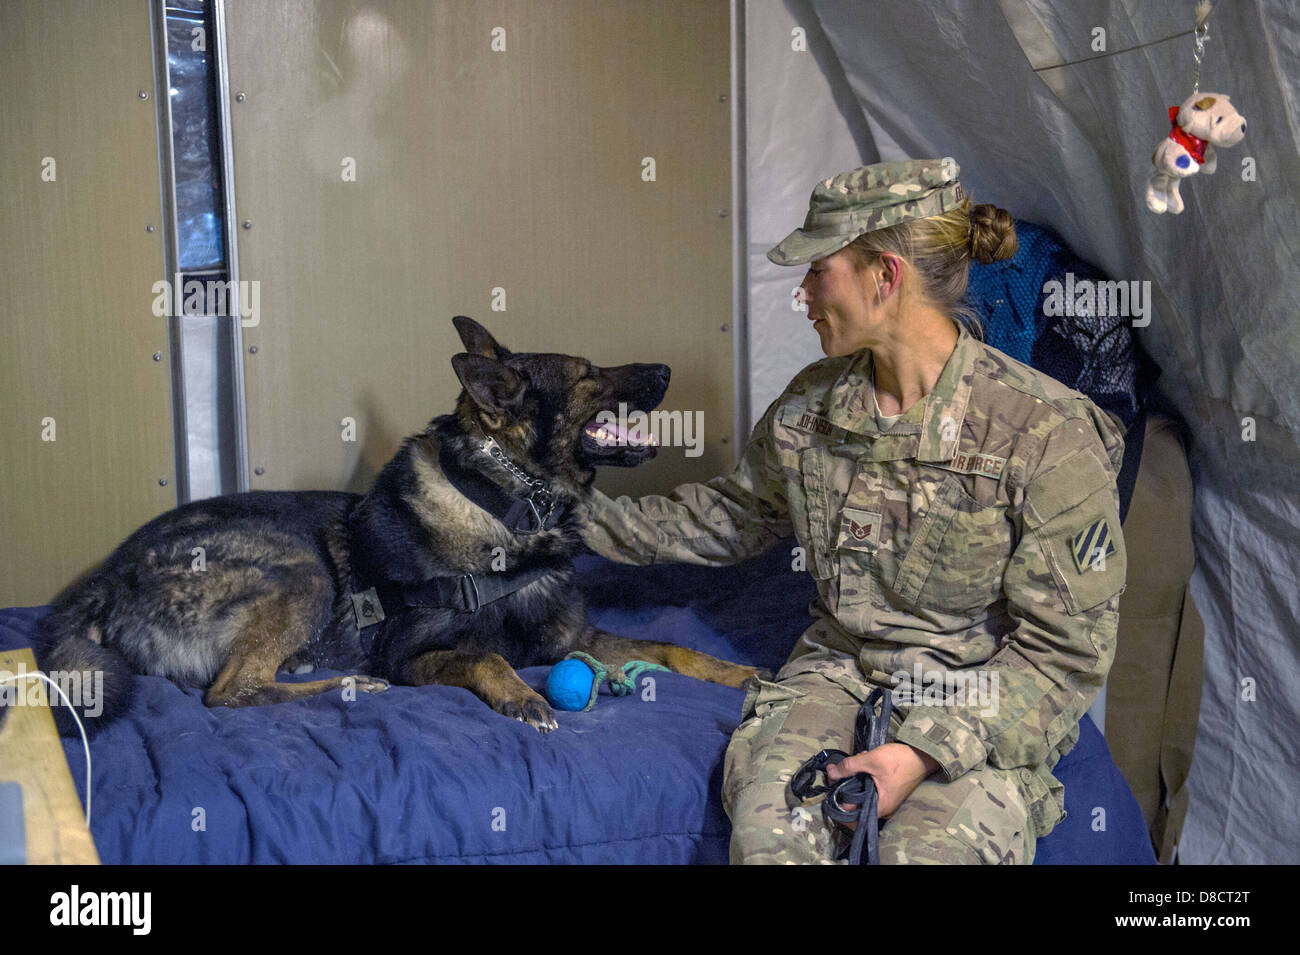 US Air Force Staff Sgt. Jessie Johnson, a military working dog handler with the 3rd Infantry Division and her dog, Chrach, rest after successfully completing explosives detection training April 24, 2013 in Kandahar province, Afghanistan. Stock Photo